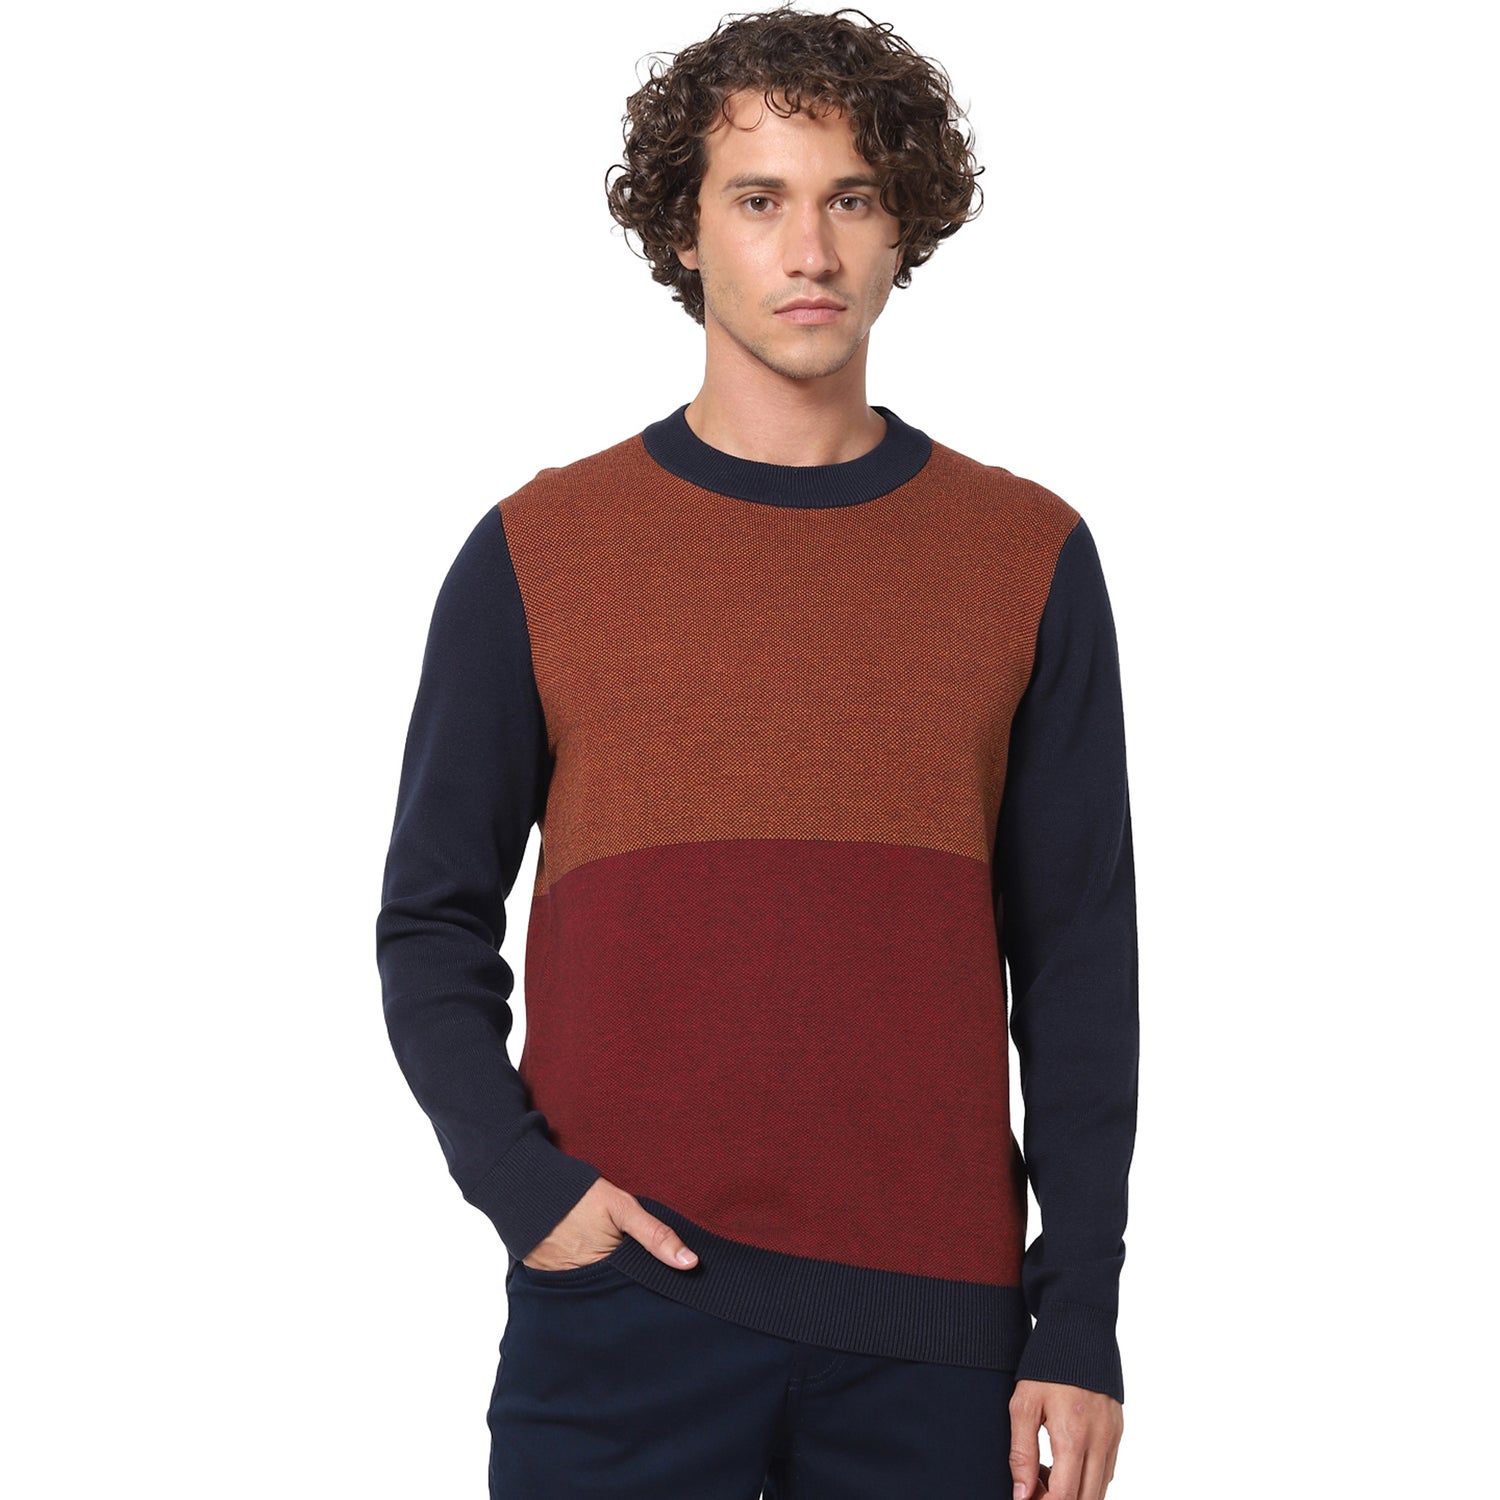 Navy Blue Solid Colorblocked Sweater (VERYGOODIN)